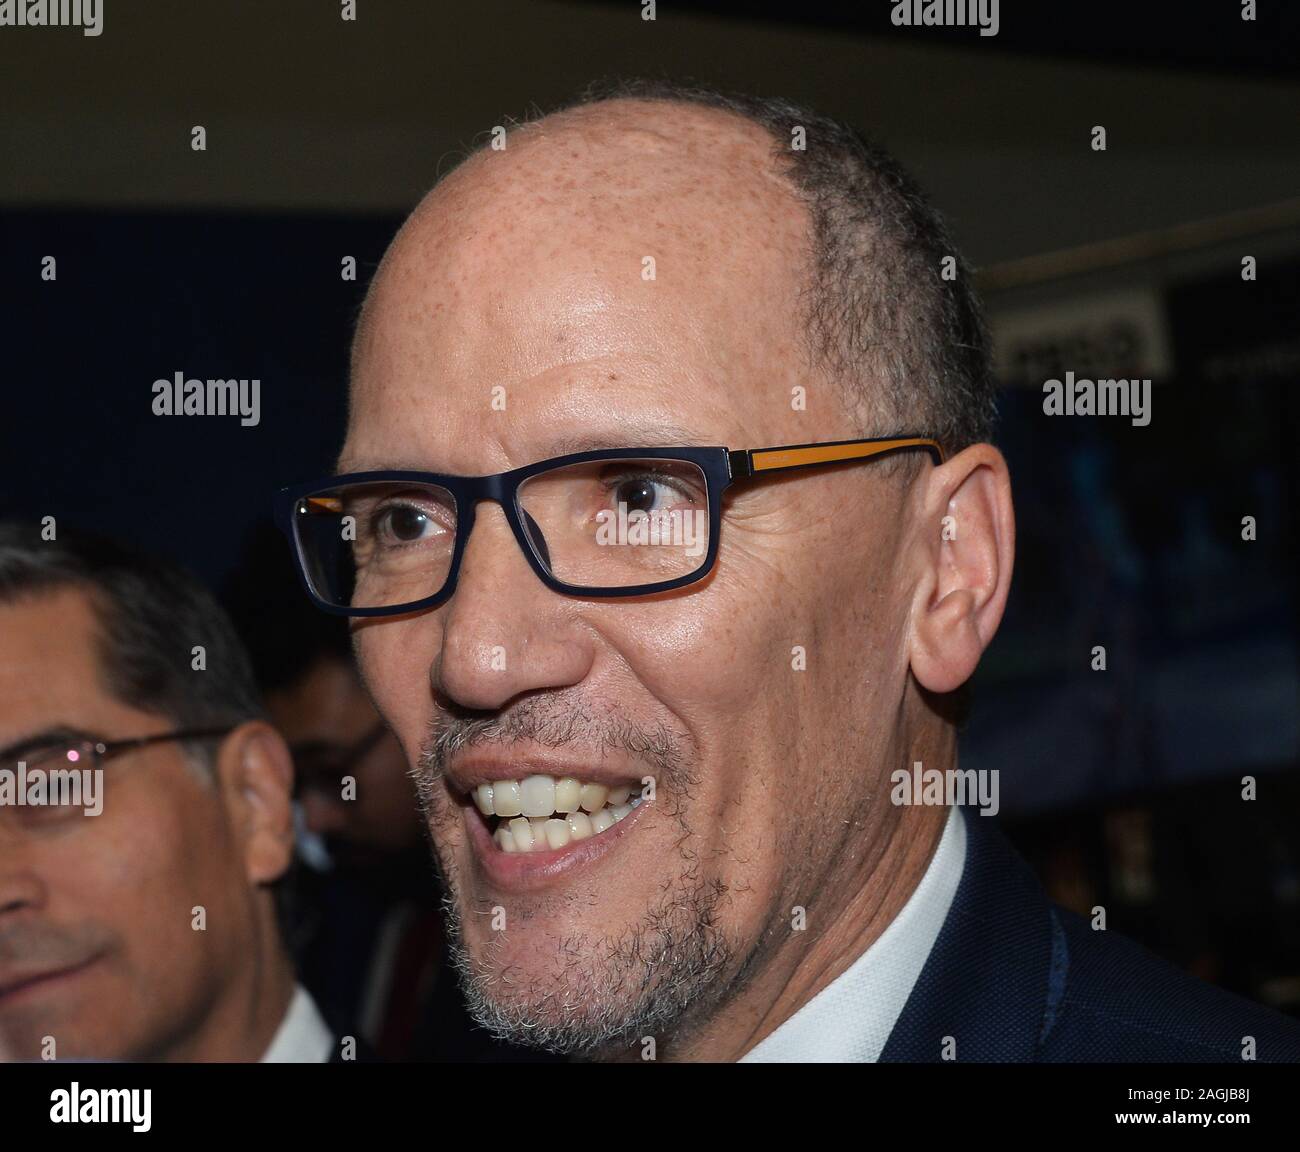 Los Angeles, United States. 19th Dec, 2019. Chair of the Democratic National Committee Tom Perez speaks with reporters prior to the sixth Democratic presidential debate at Loyola Marymount University on Thursday, December 19, 2019 in Los Angeles. Photo by Jim RuymenUPI Credit: UPI/Alamy Live News Stock Photo